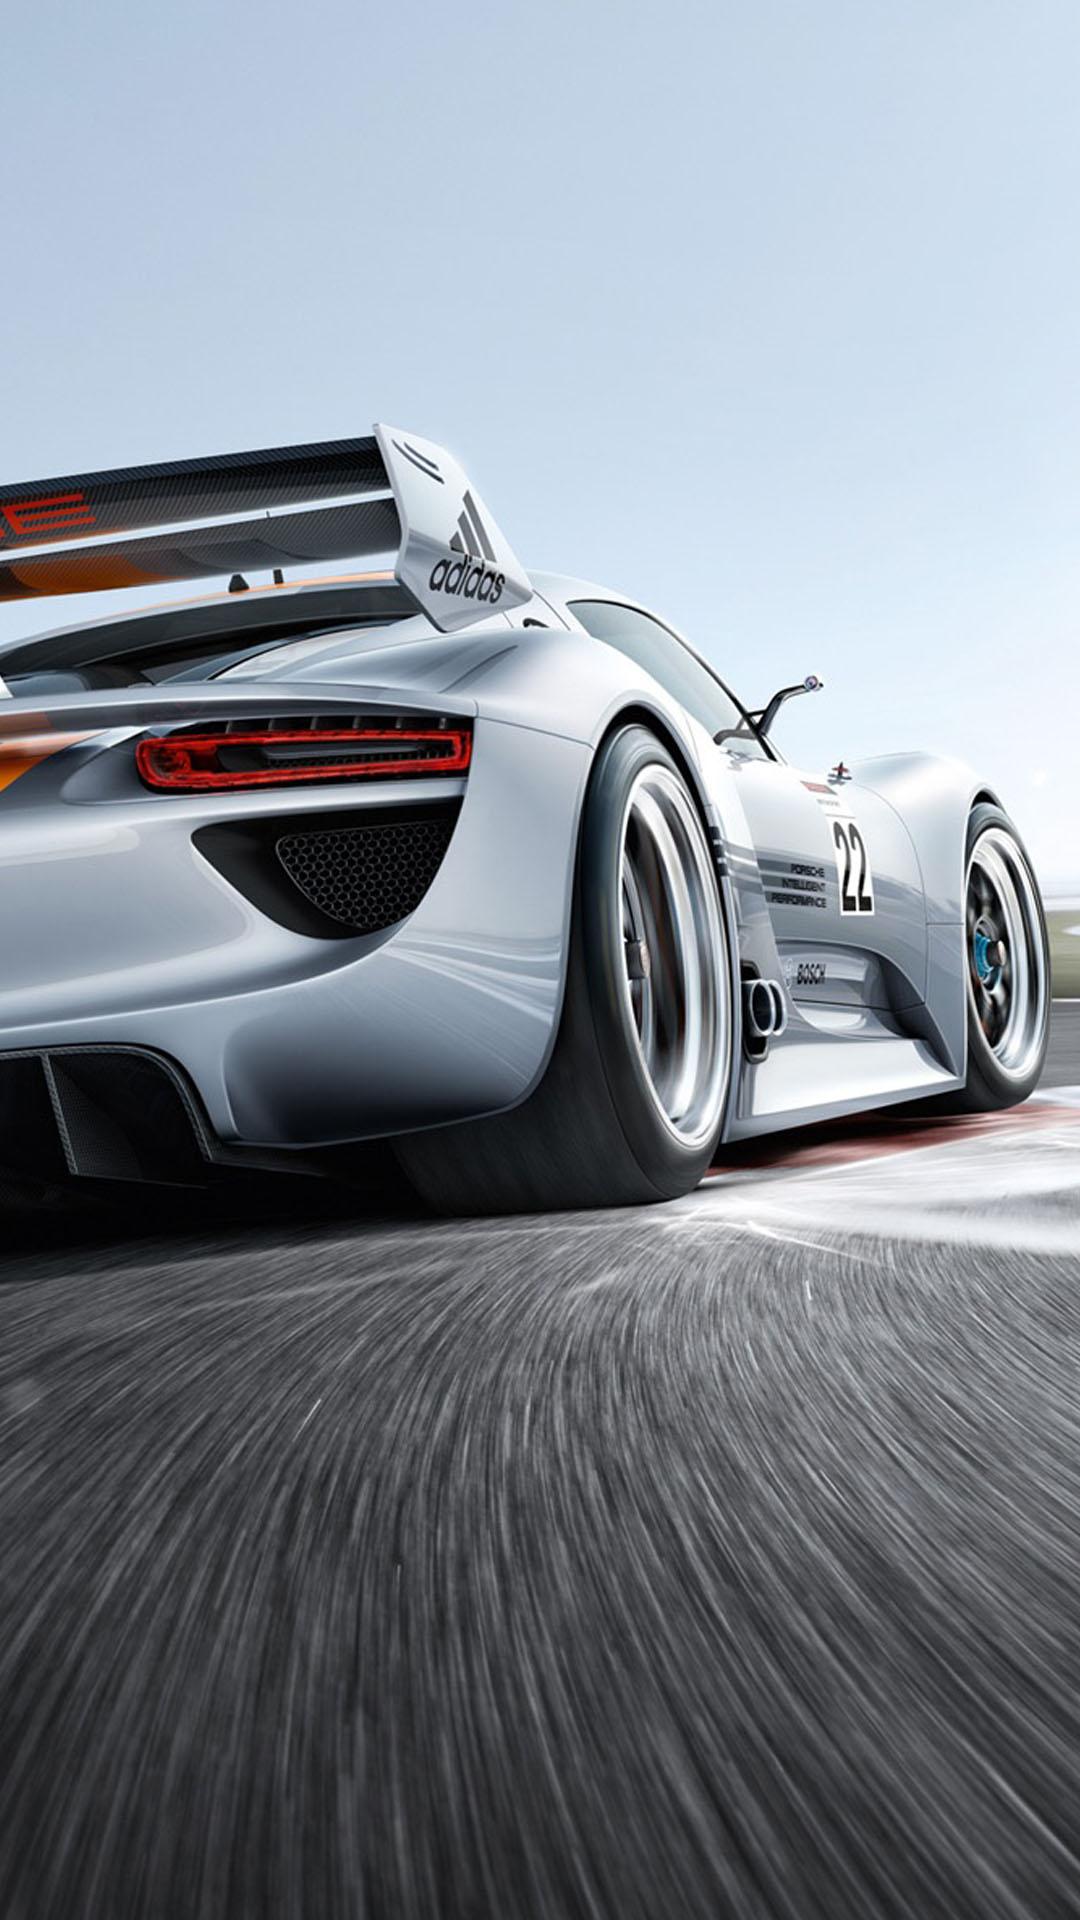 Porsche 918 RSRK wallpaper, free and easy to download